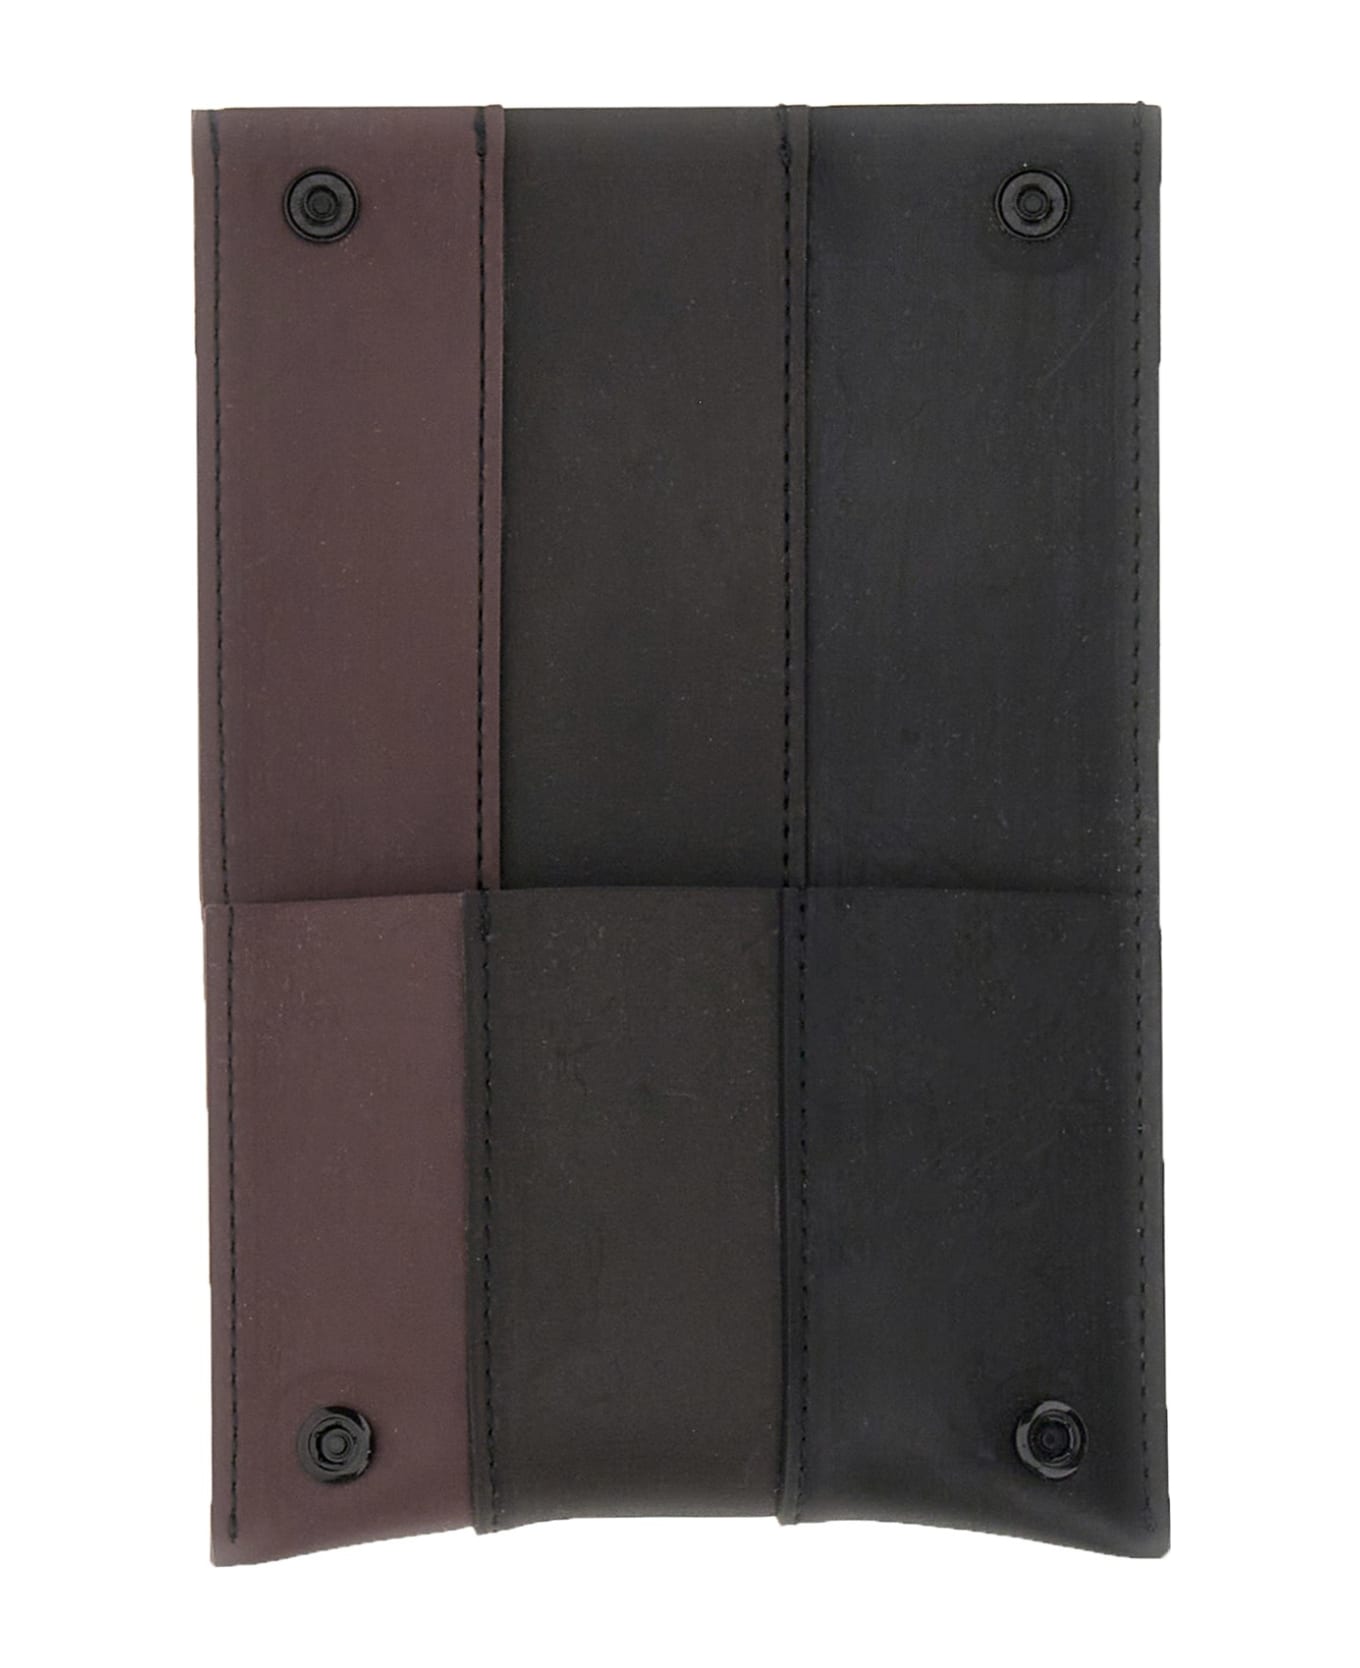 Sunnei Parallelepiped Pudding Wallet - NERO